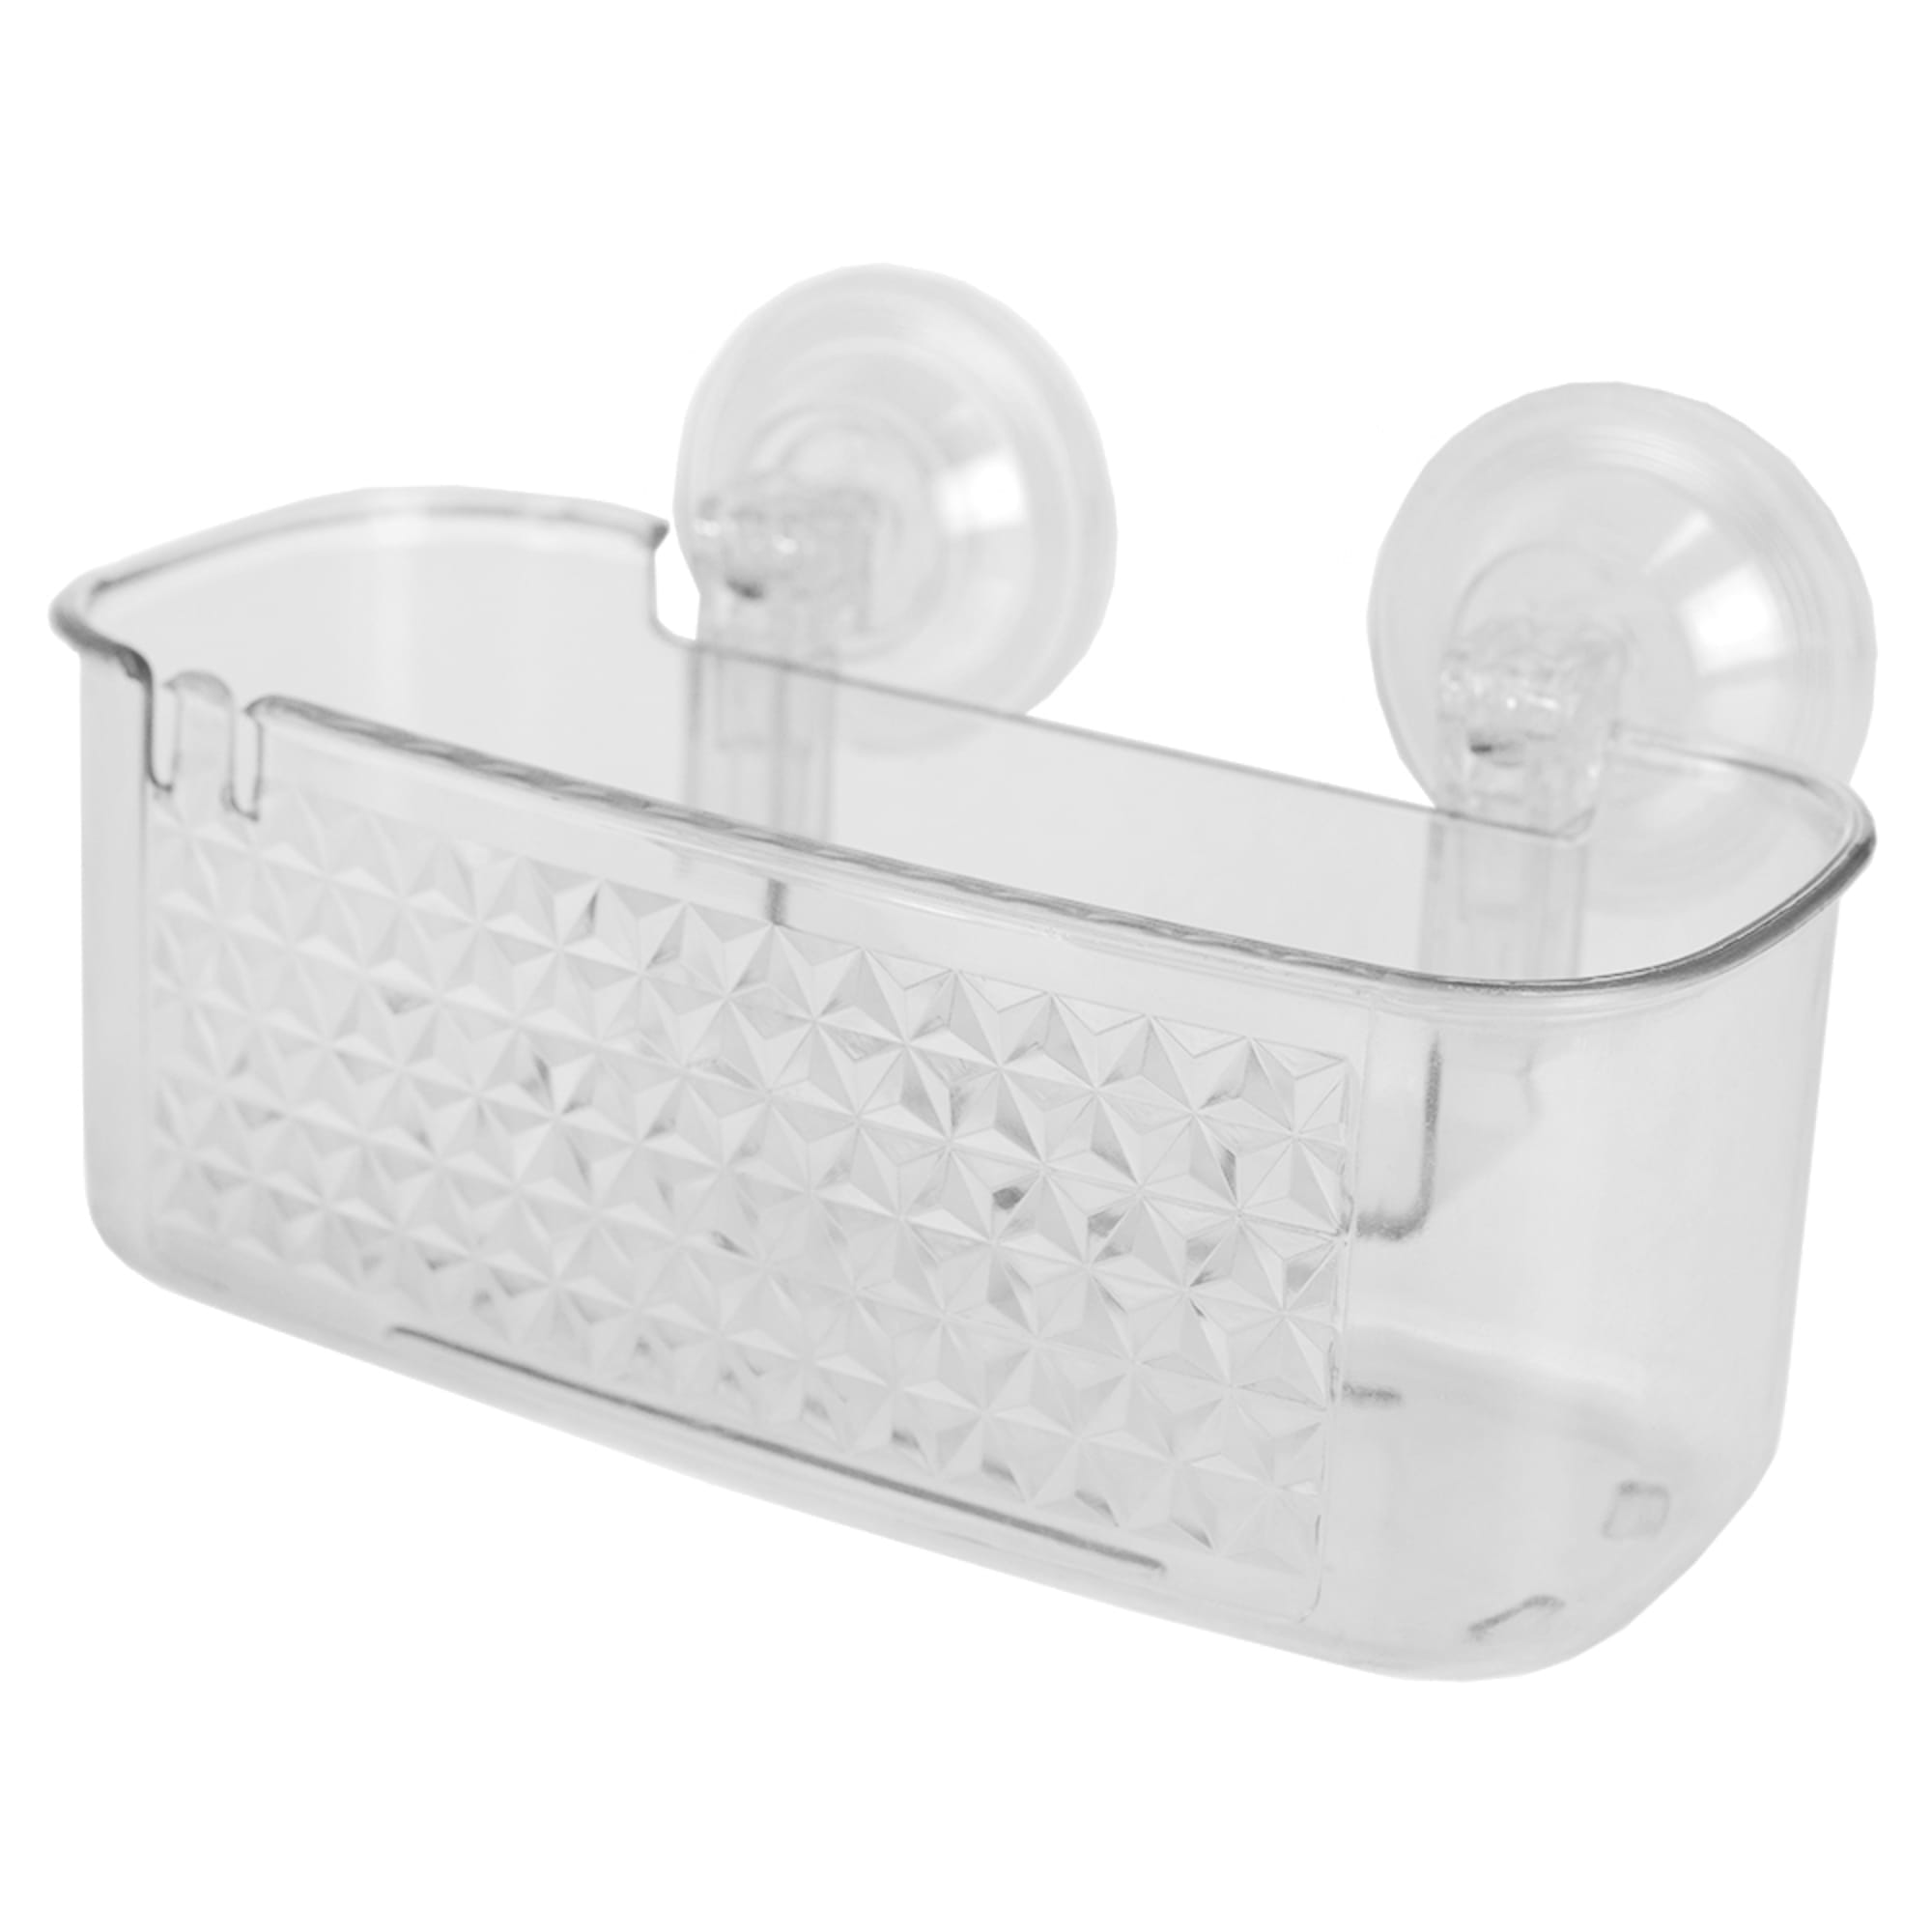 Home Basics Medium Cubic Patterned Plastic Shower Caddy with Suction Cups, Clear $3.00 EACH, CASE PACK OF 24